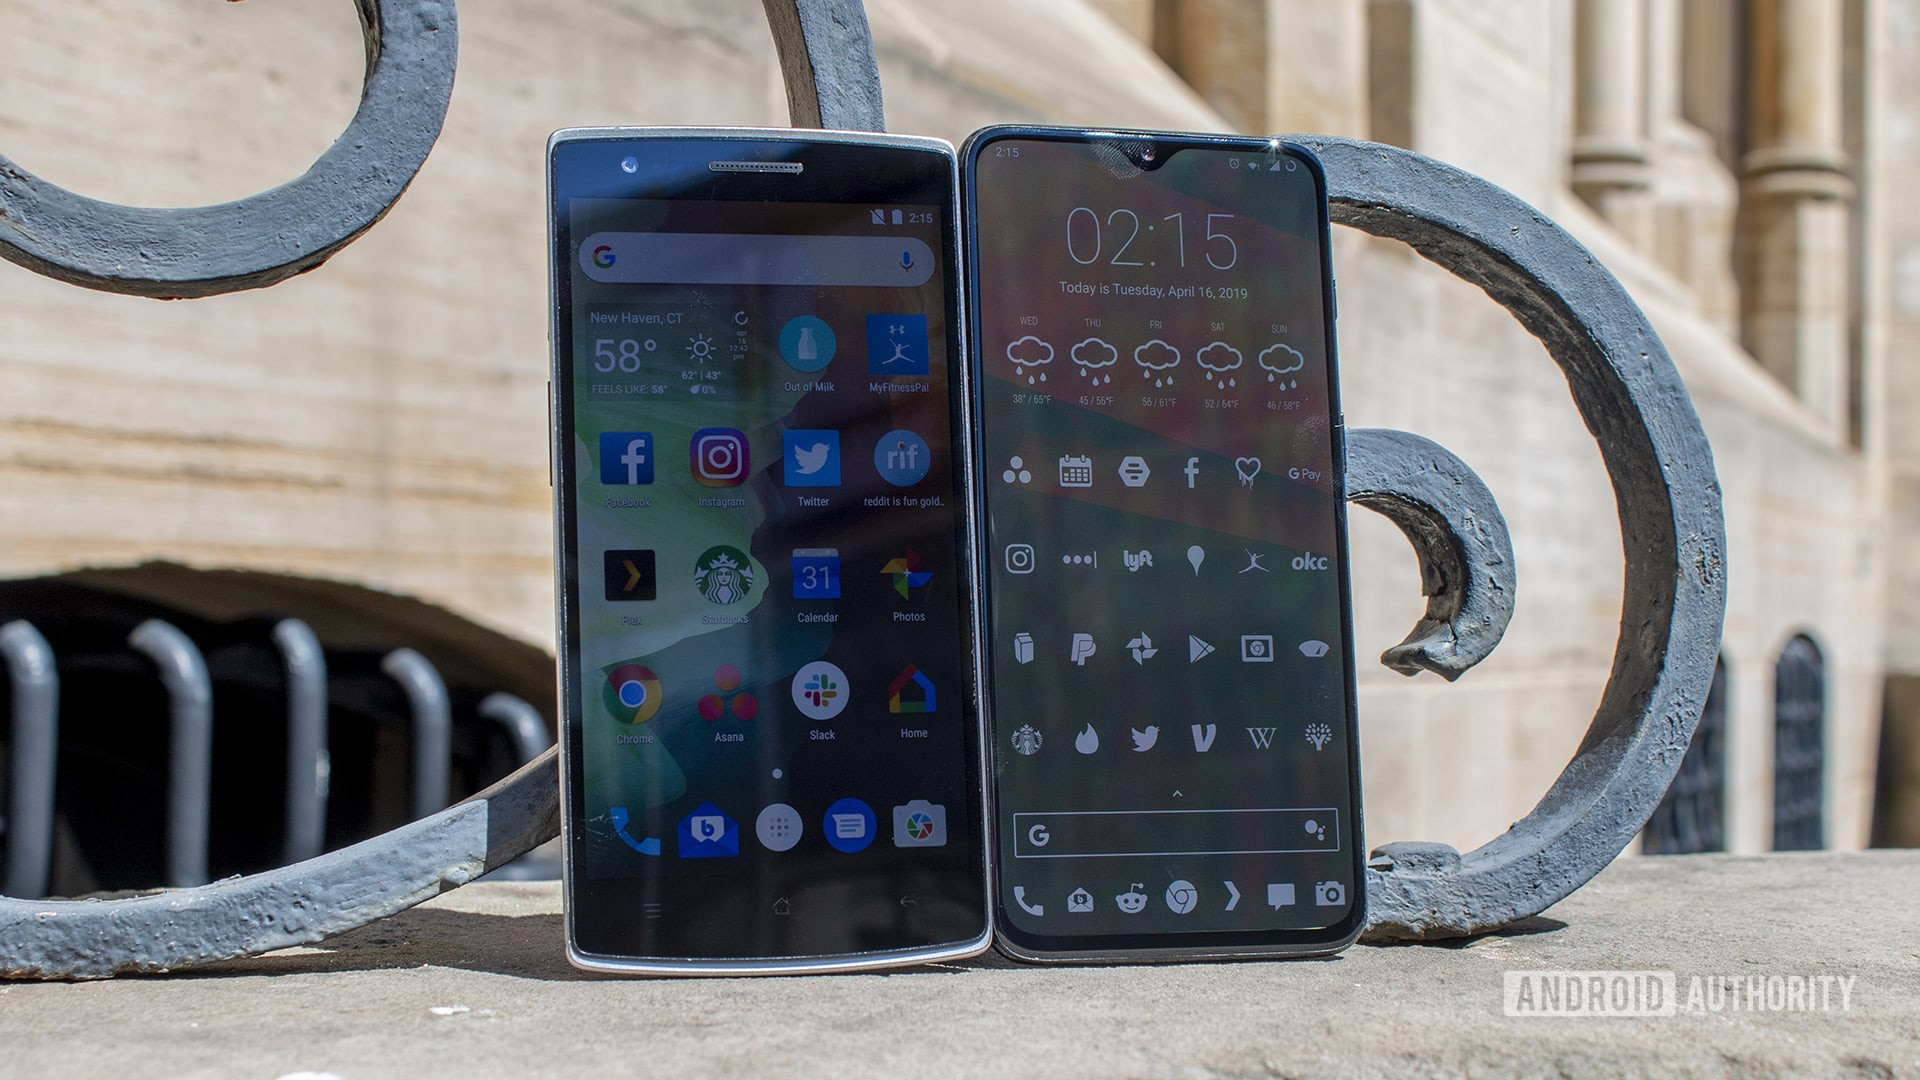 The OnePlus One and the OnePlus 6T side by side.